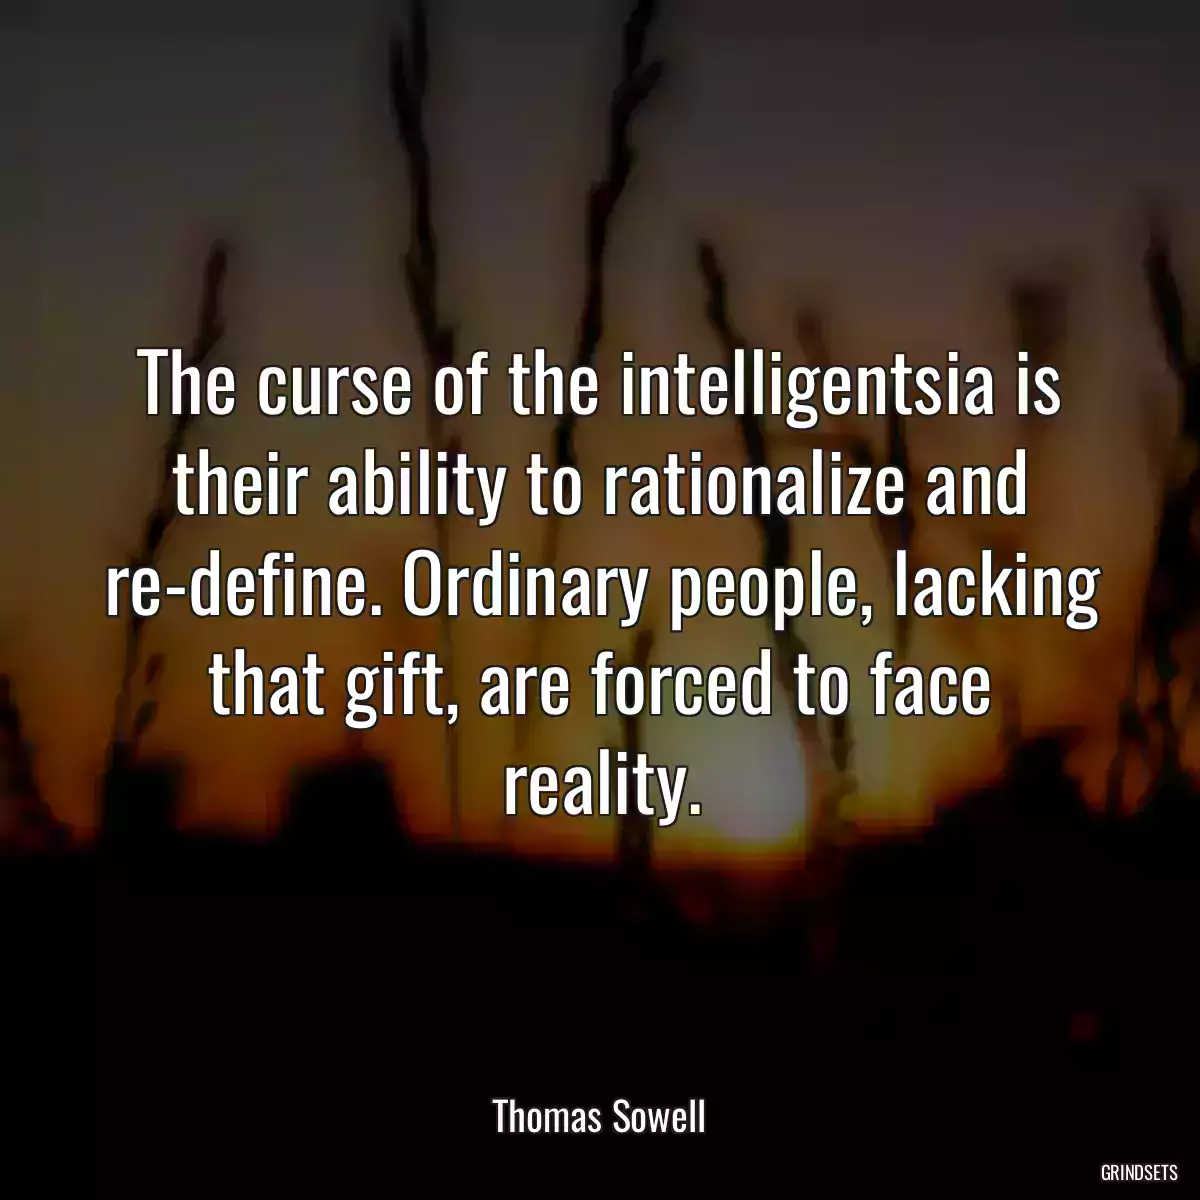 The curse of the intelligentsia is their ability to rationalize and re-define. Ordinary people, lacking that gift, are forced to face reality.